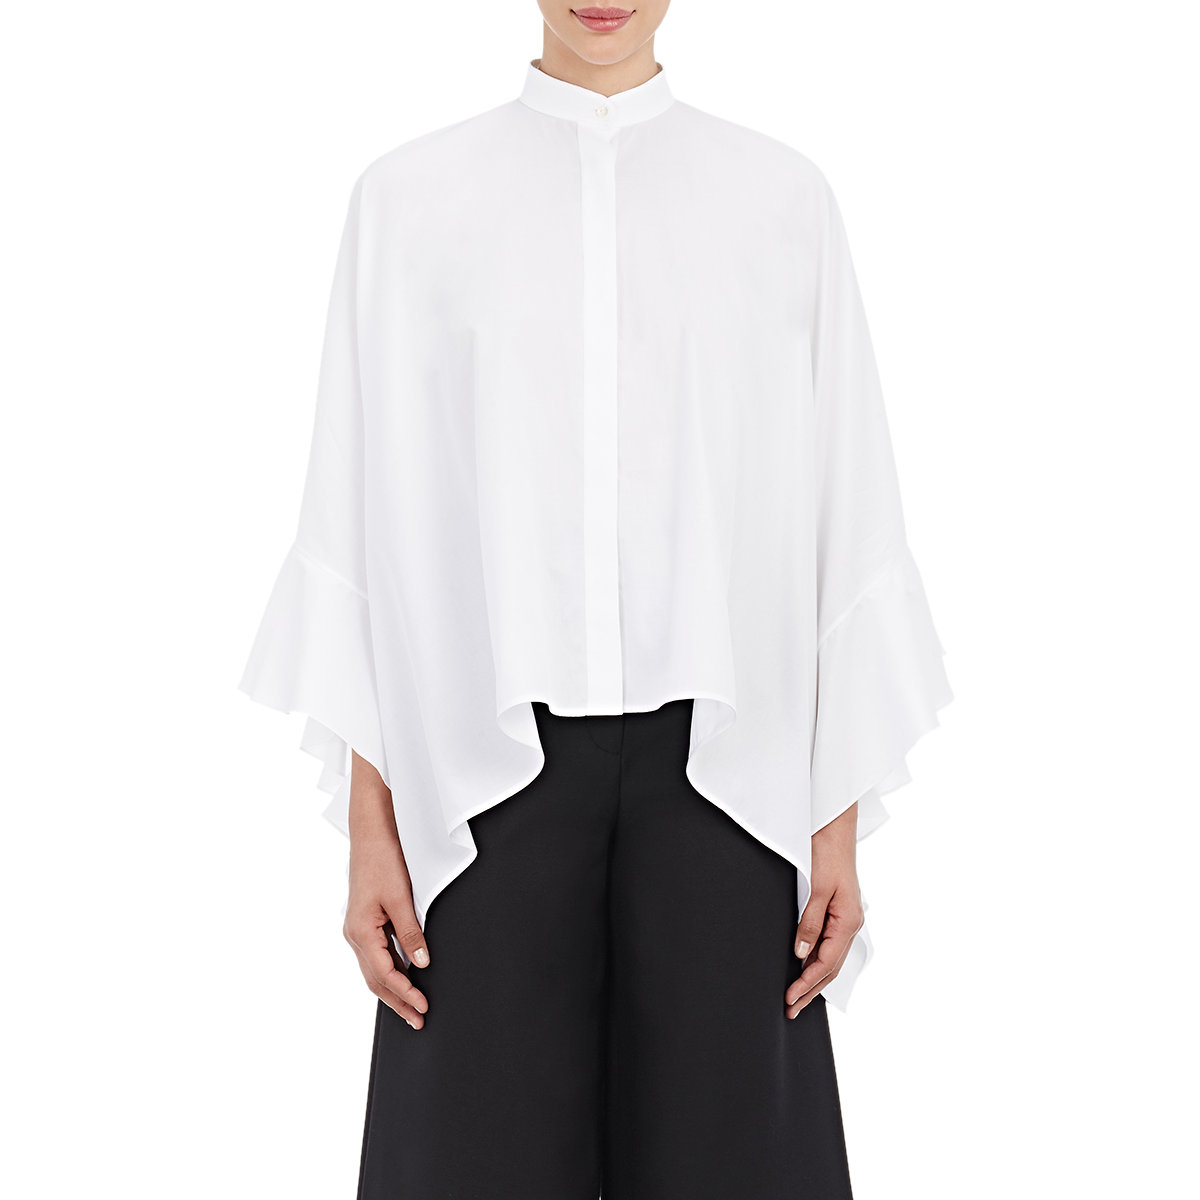 Lyst - Valentino Poncho Blouse in White